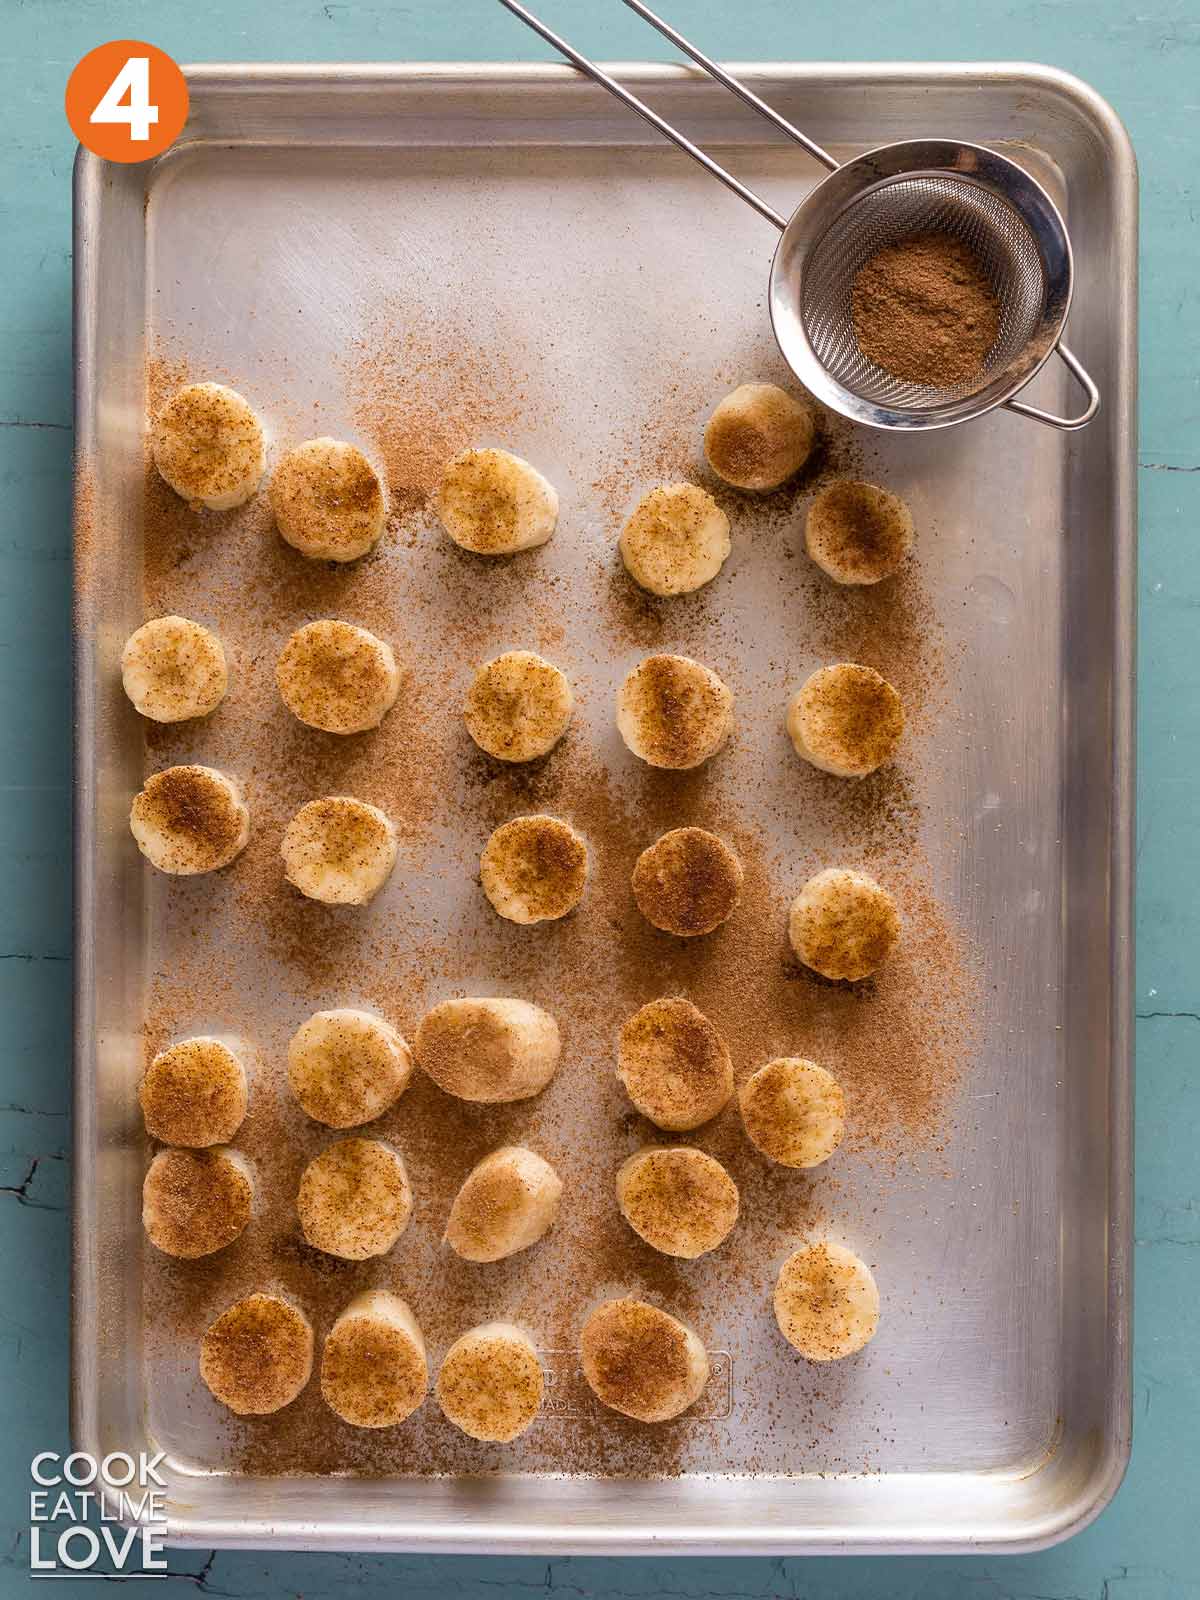 Cinnamon sprinkled over the top of the bananas.